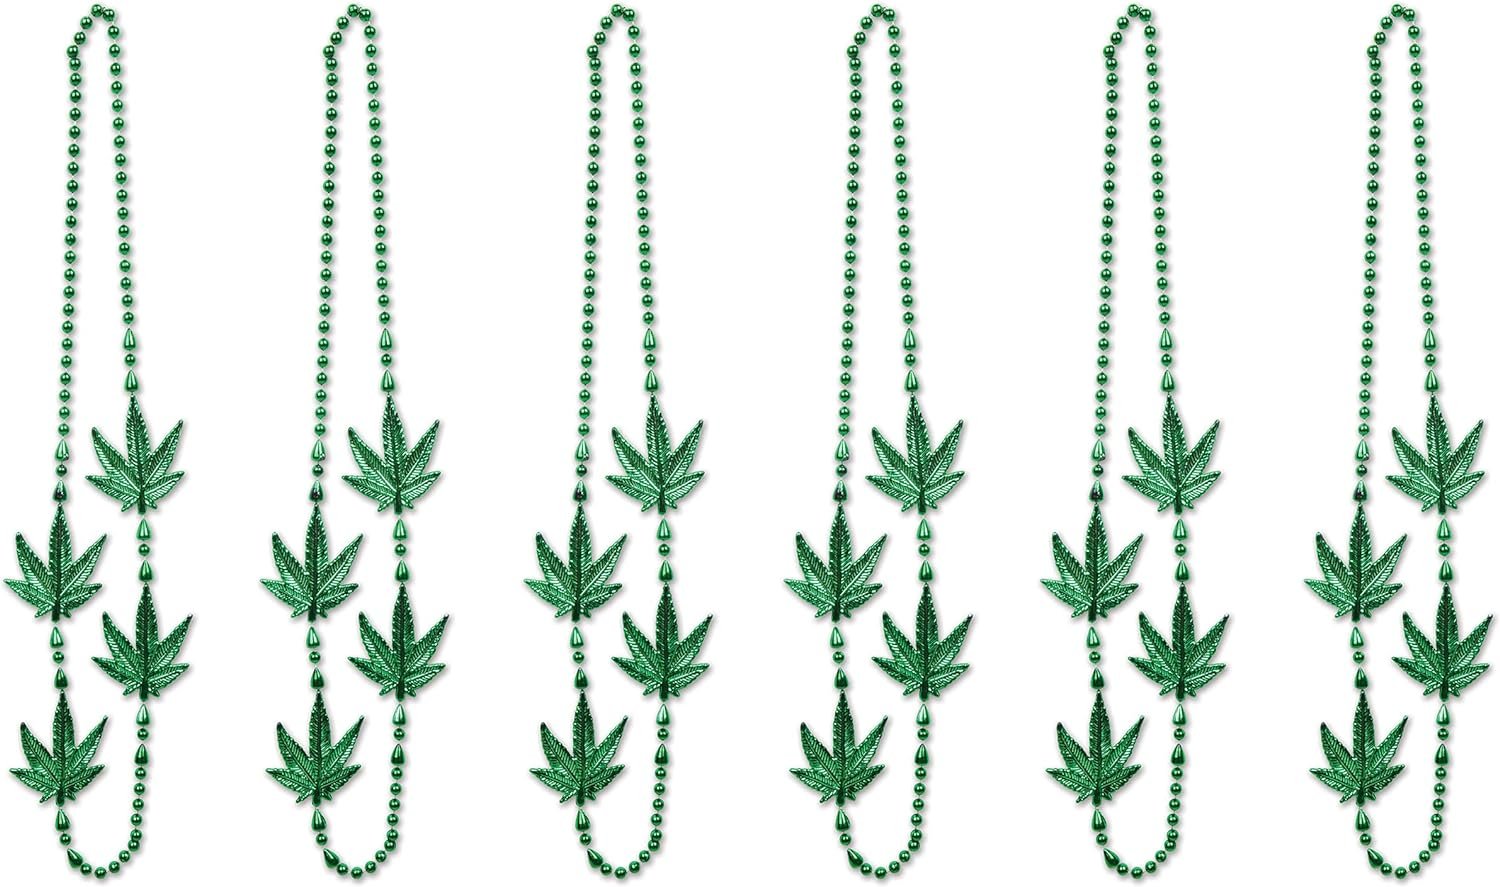 Weed Beads Necklace.jpg